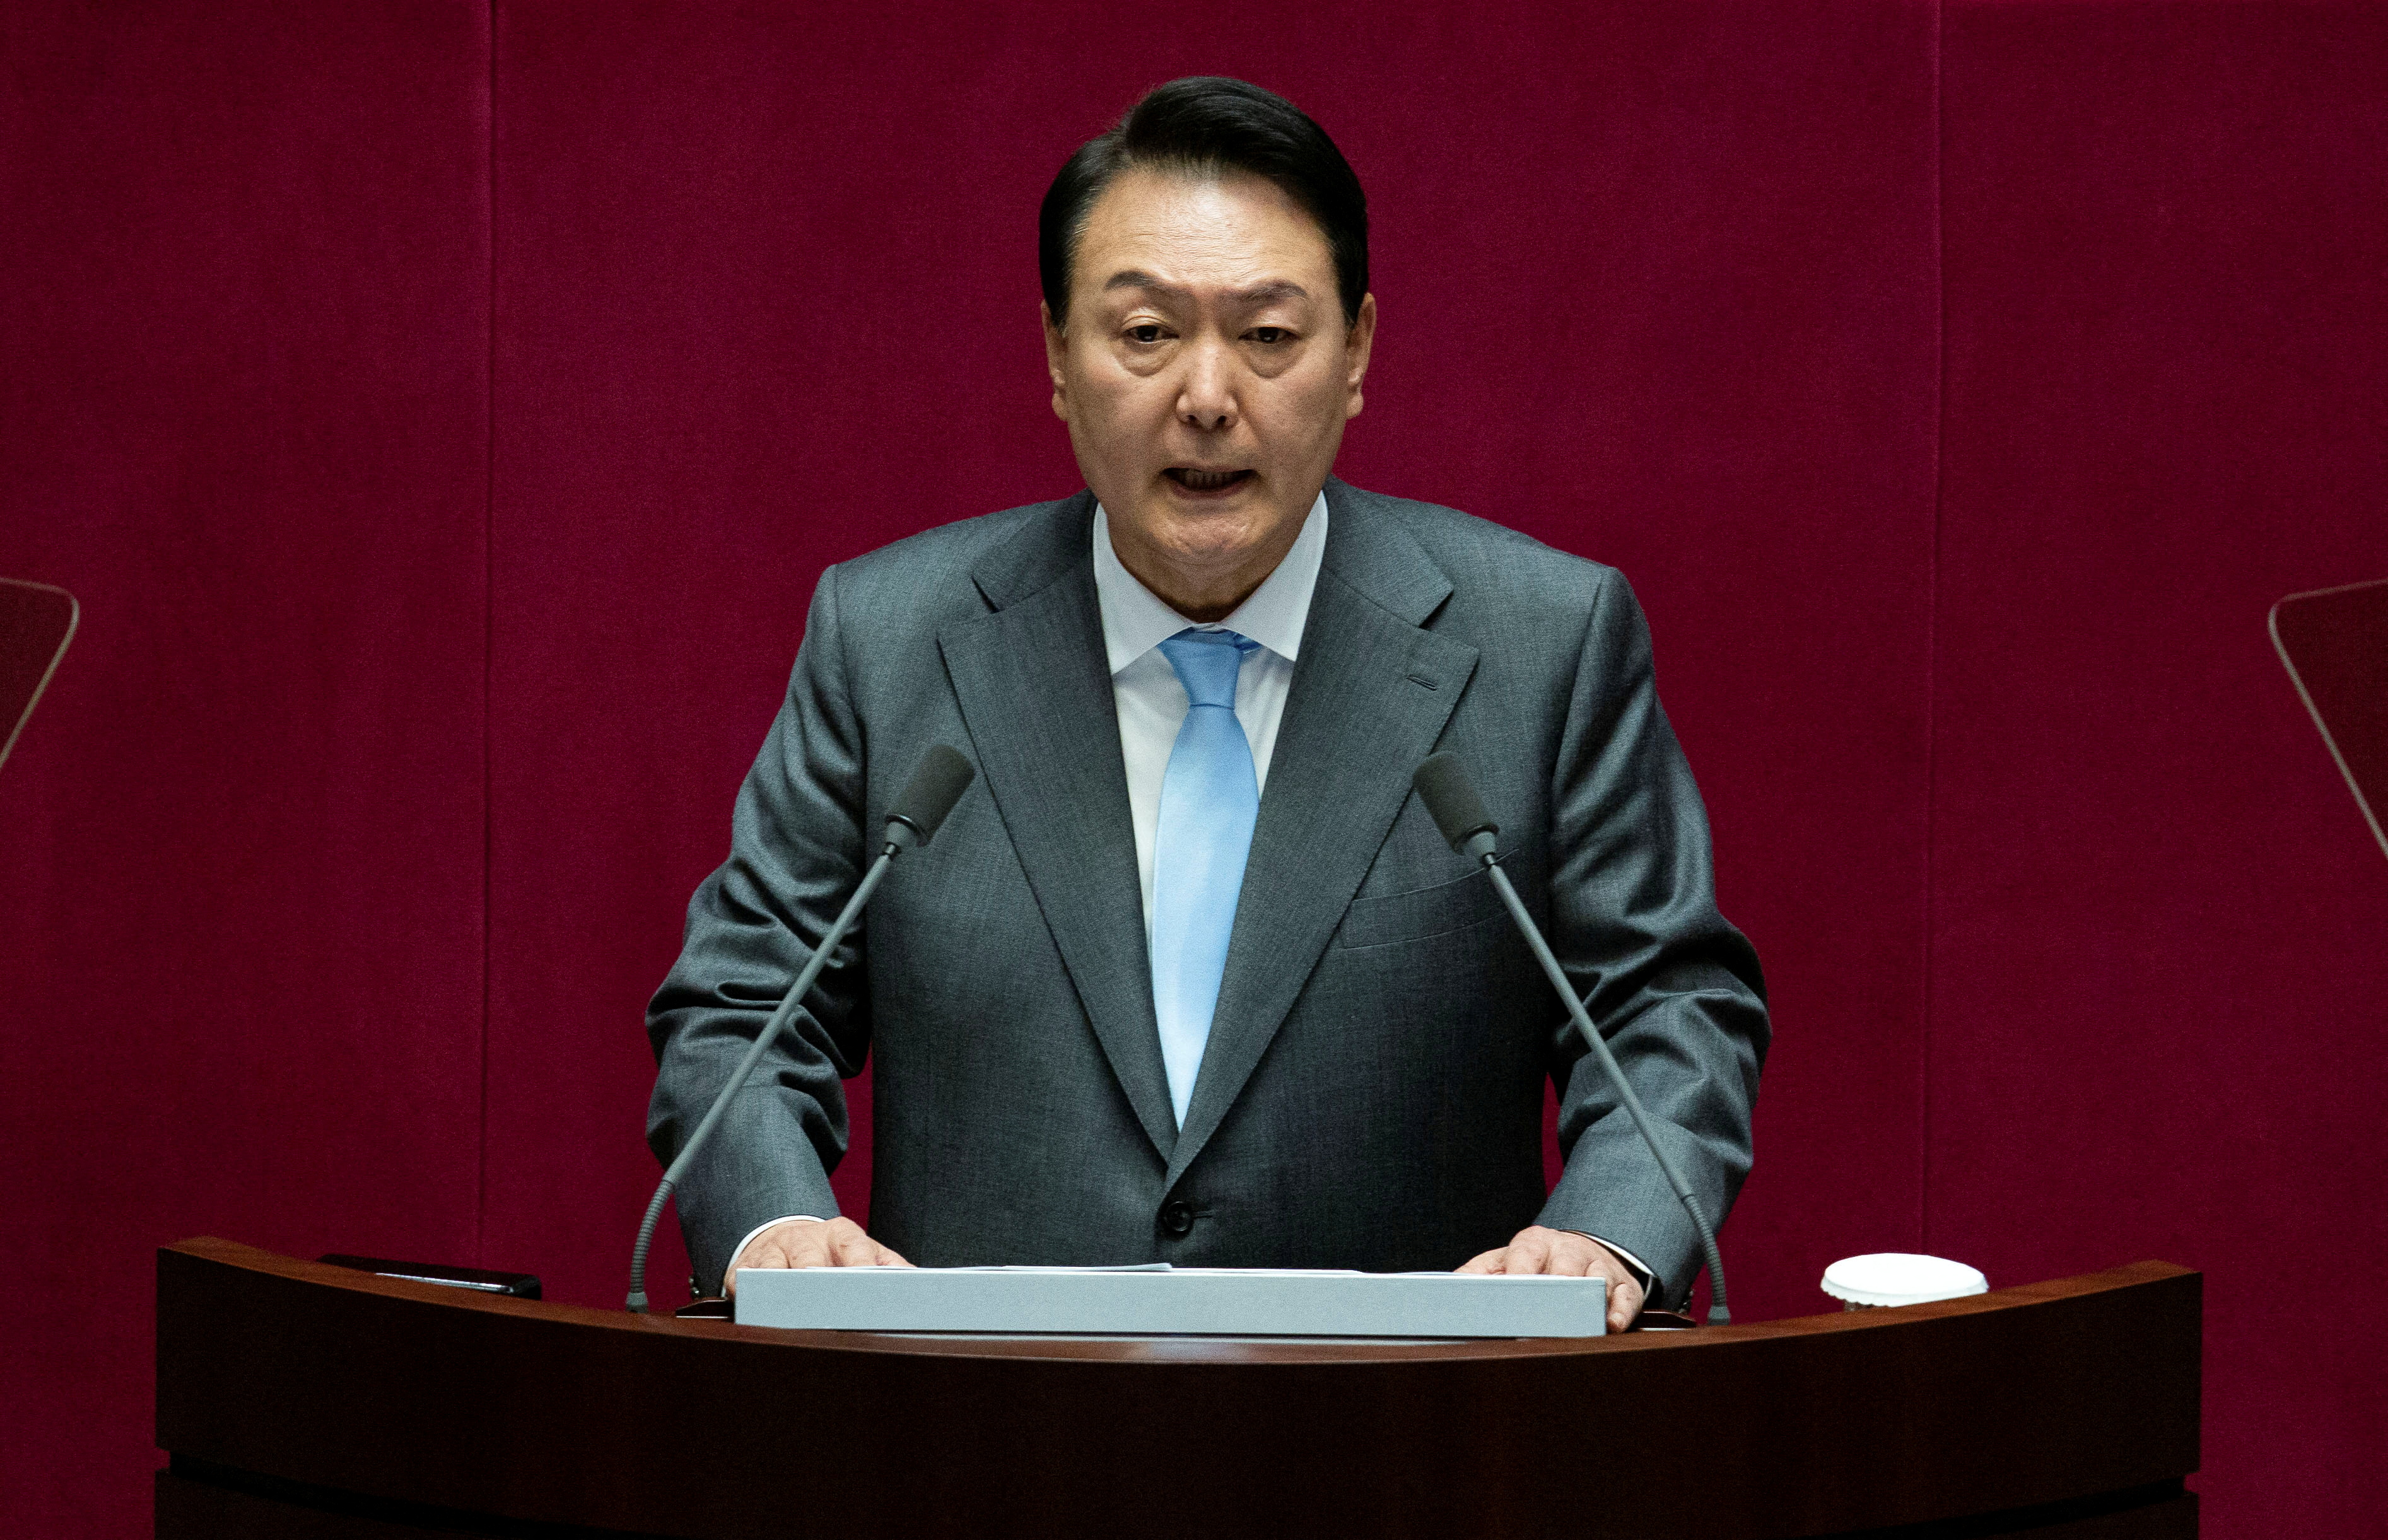 The President Yoon Suk-yeol's speech on the government supplementary budget in Seoul